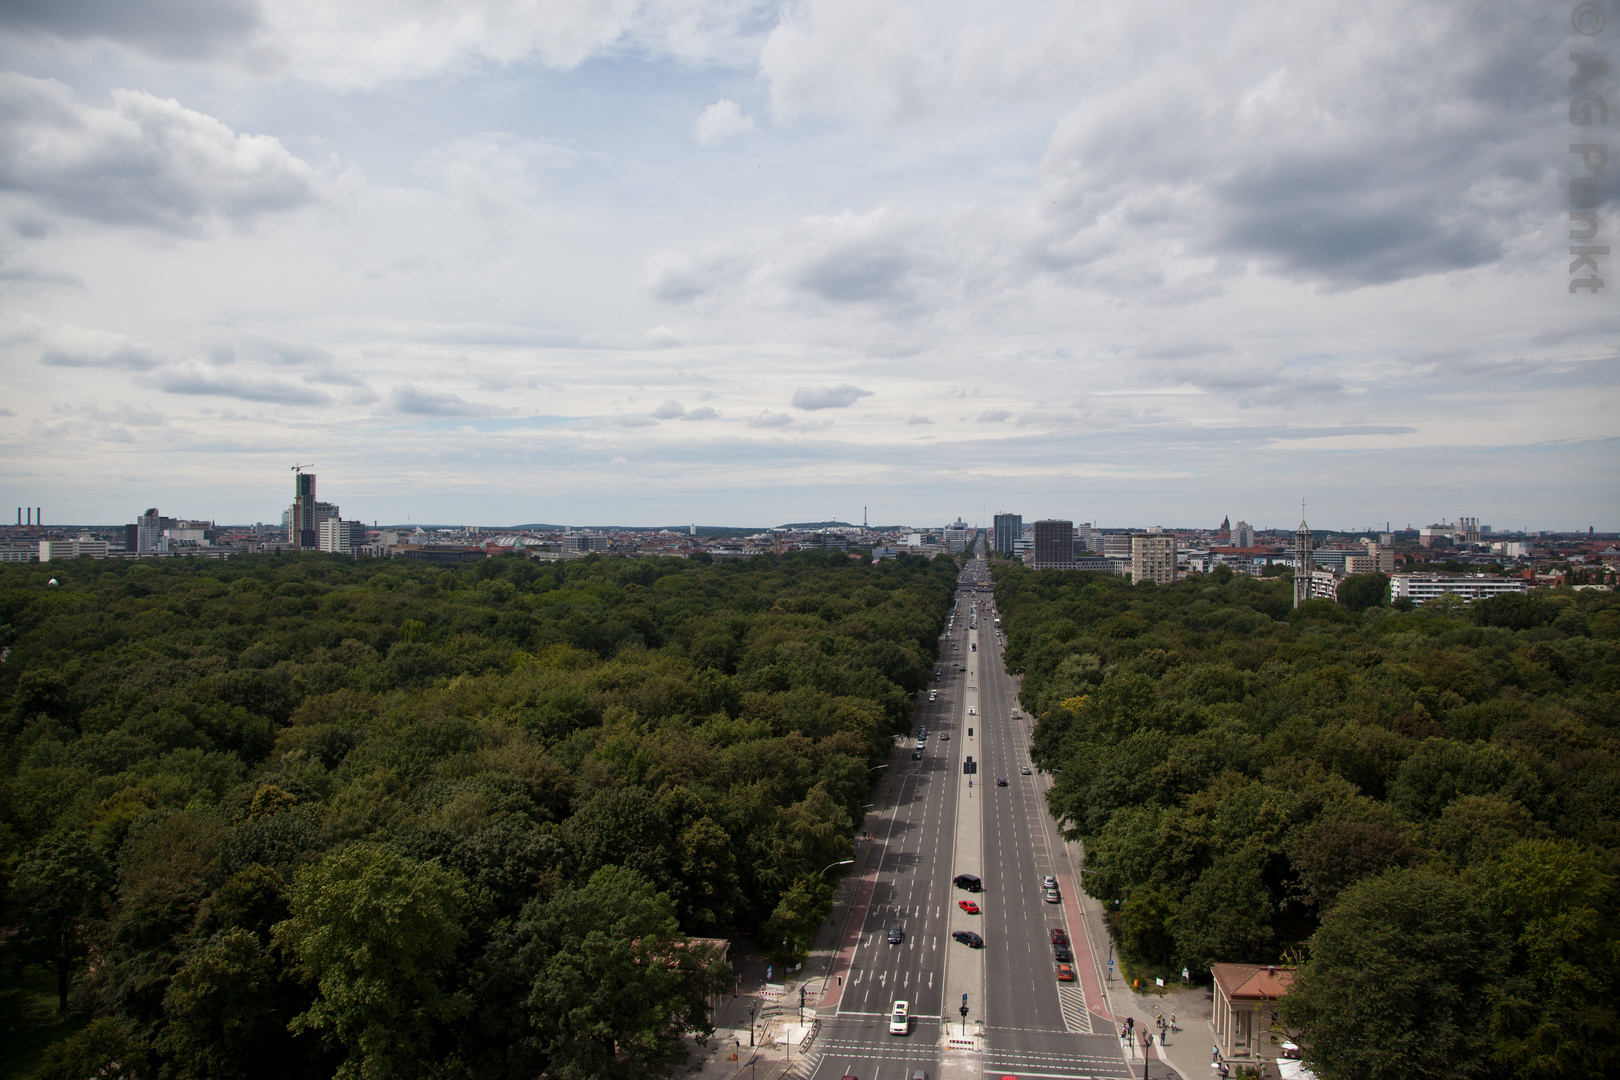 A view from the Siegessäule